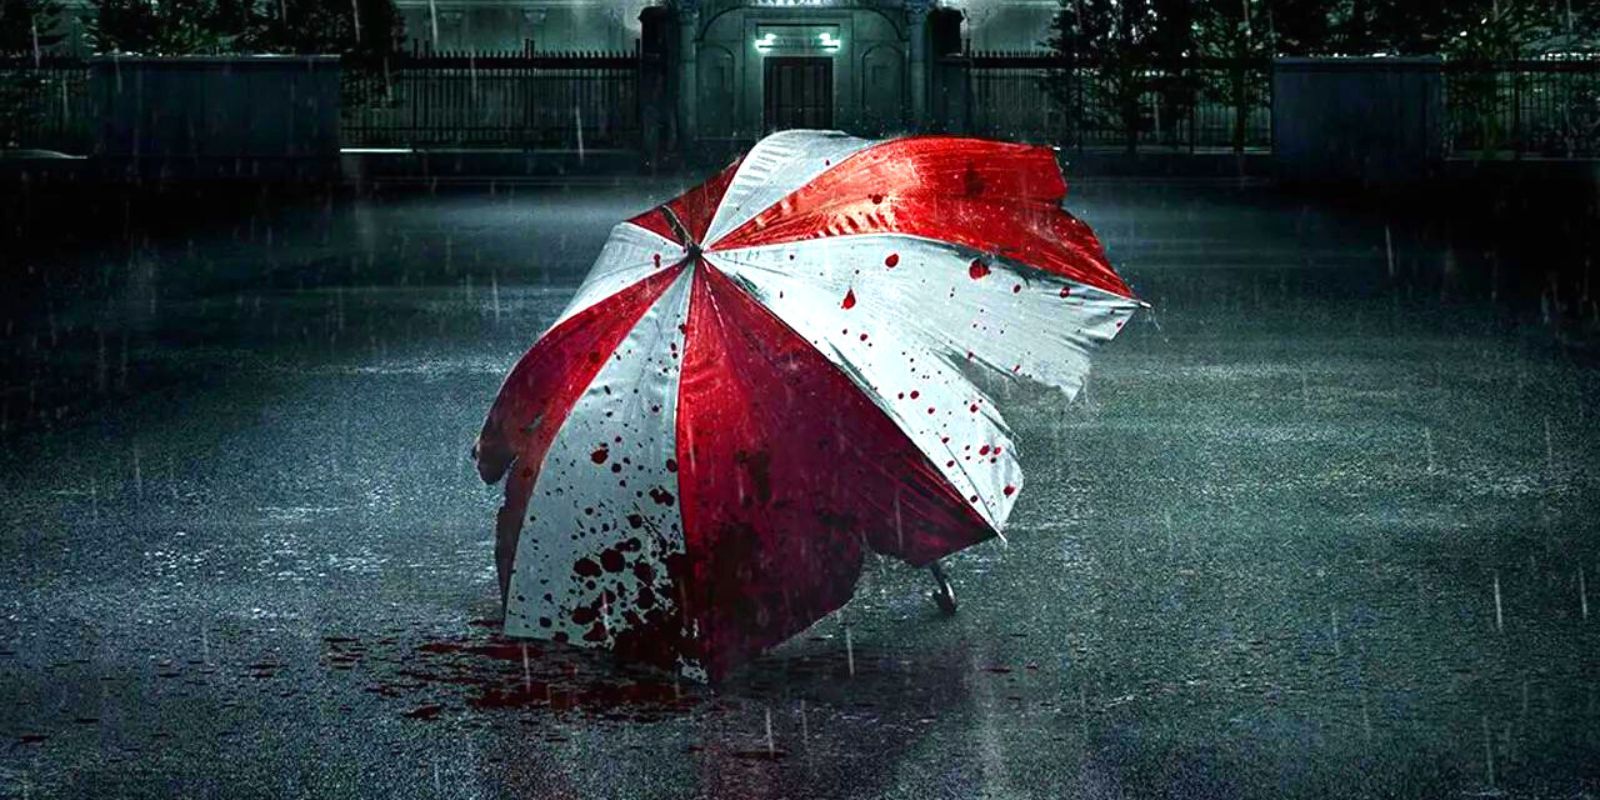 A red and white umbrella stained with blood lying in a rain-soaked road